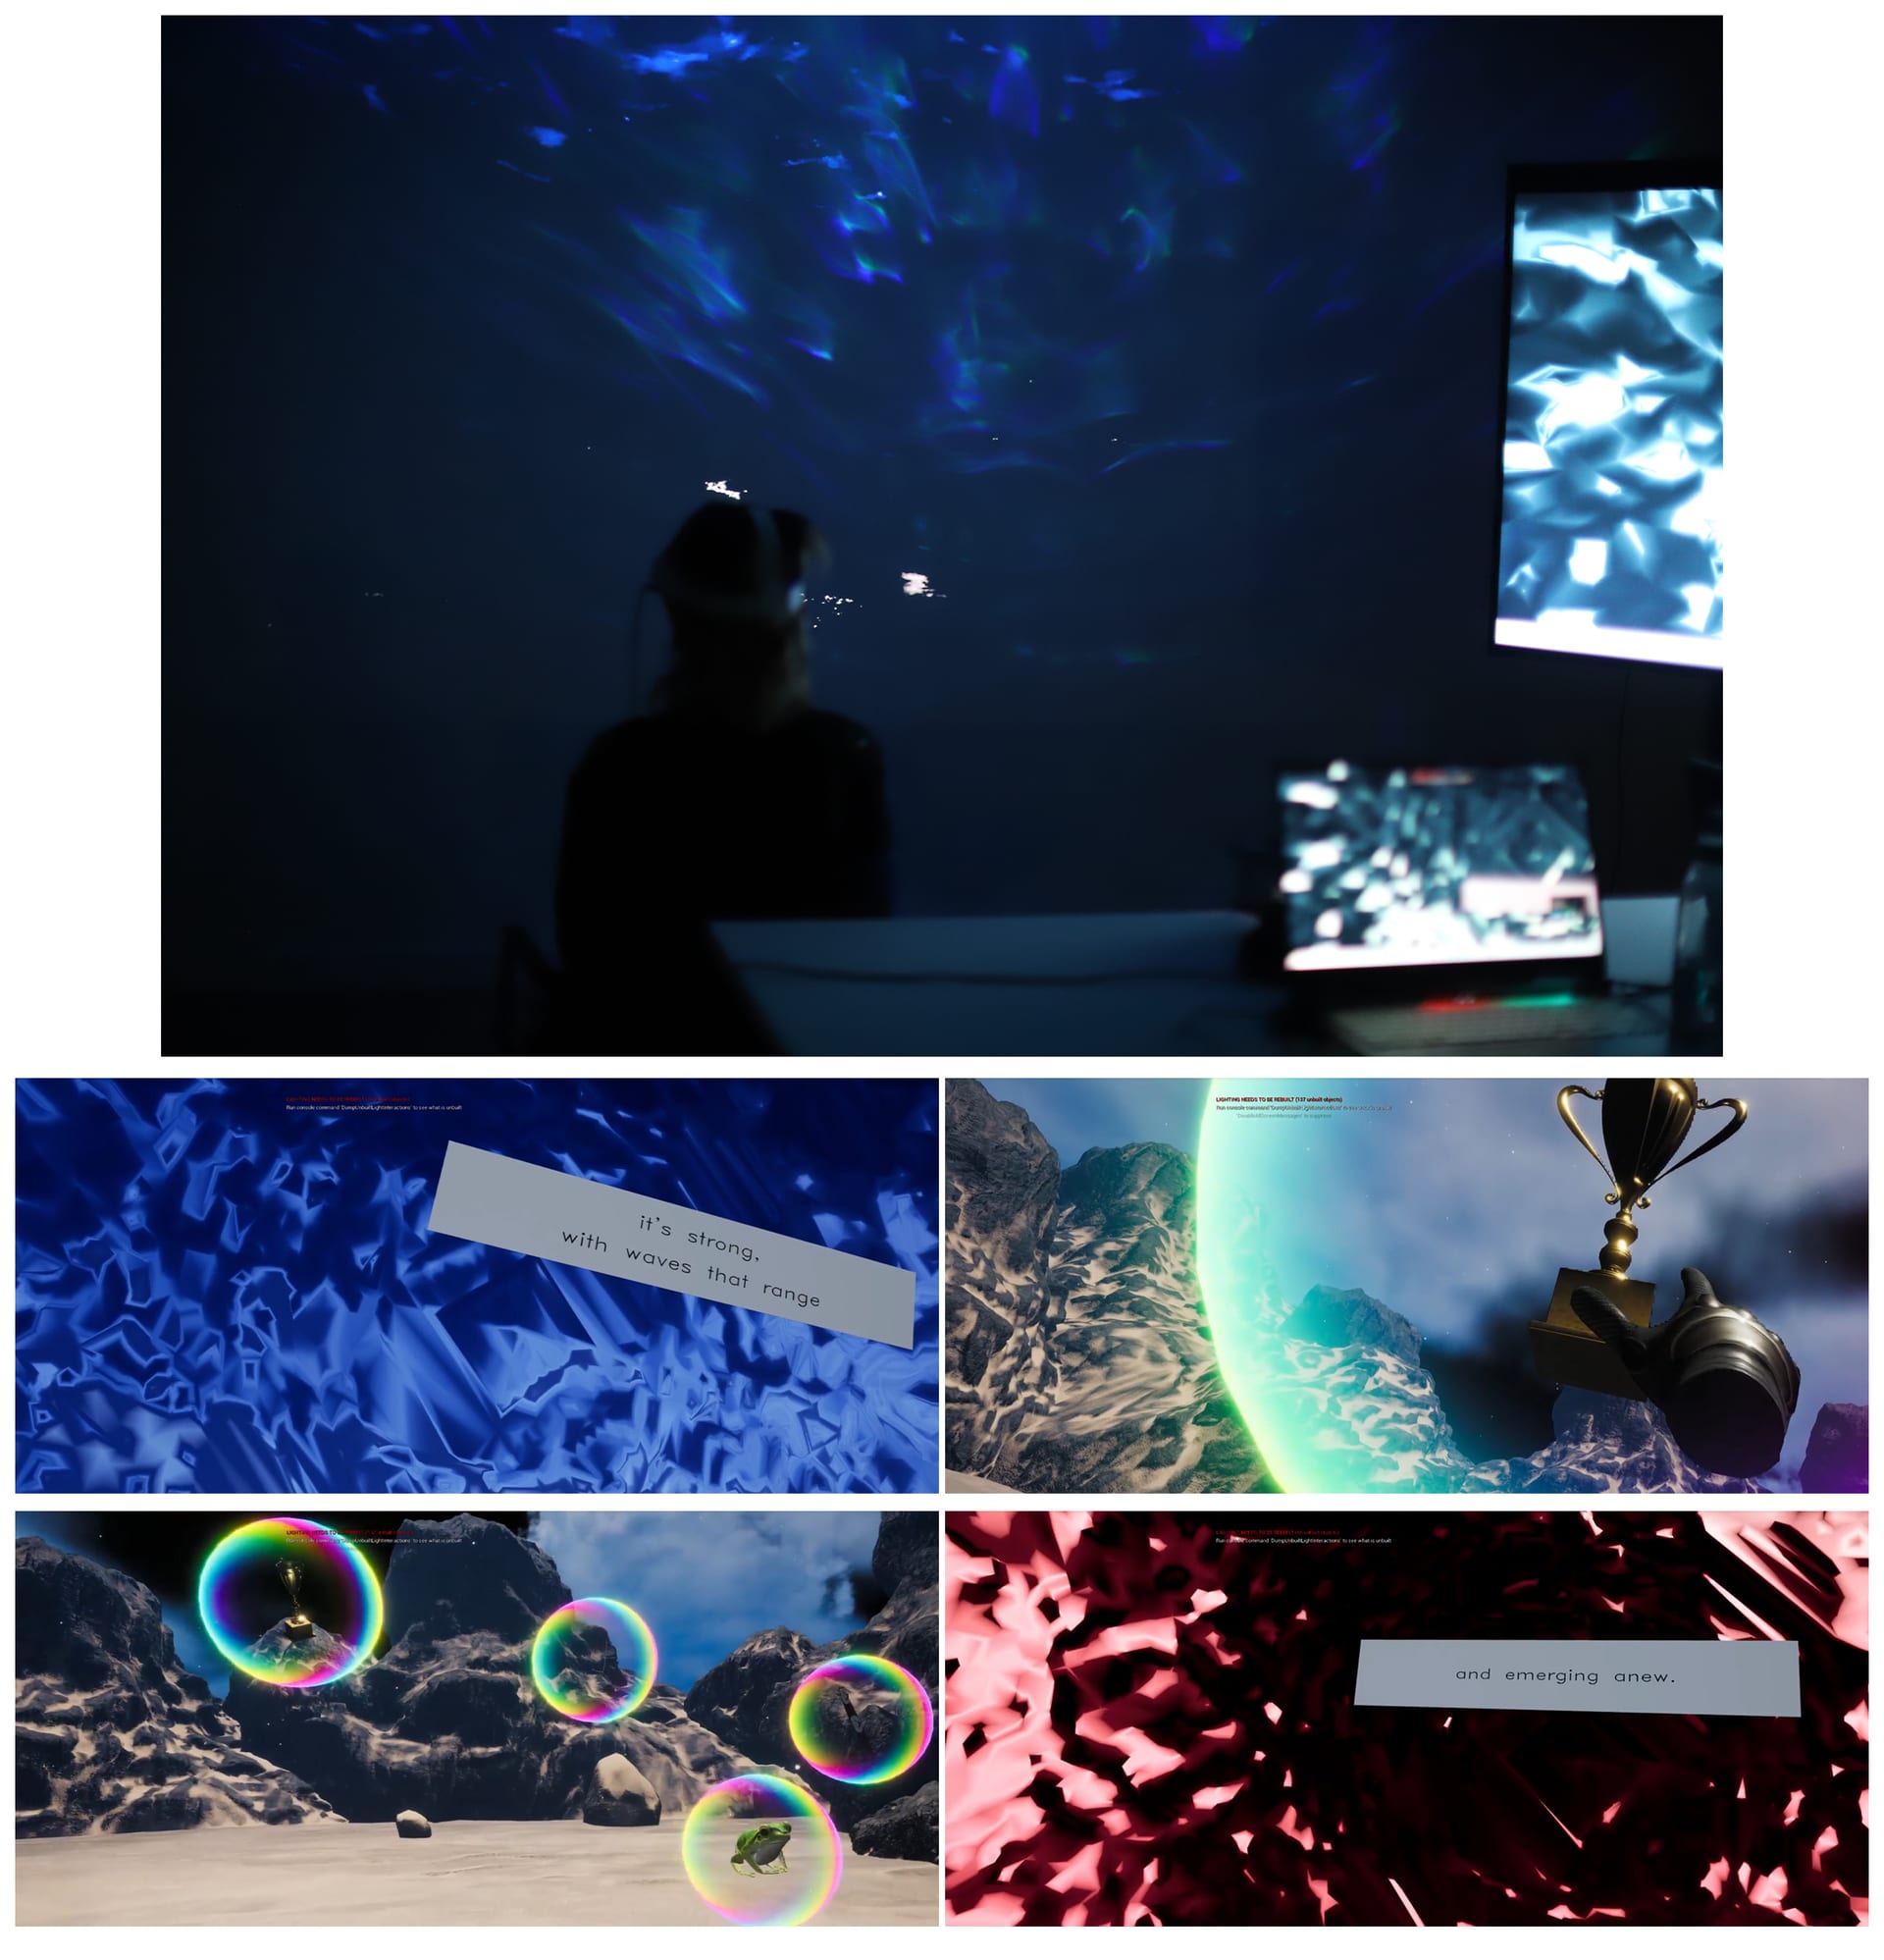 A collage of documentation images from the Sink or Swim VR experience